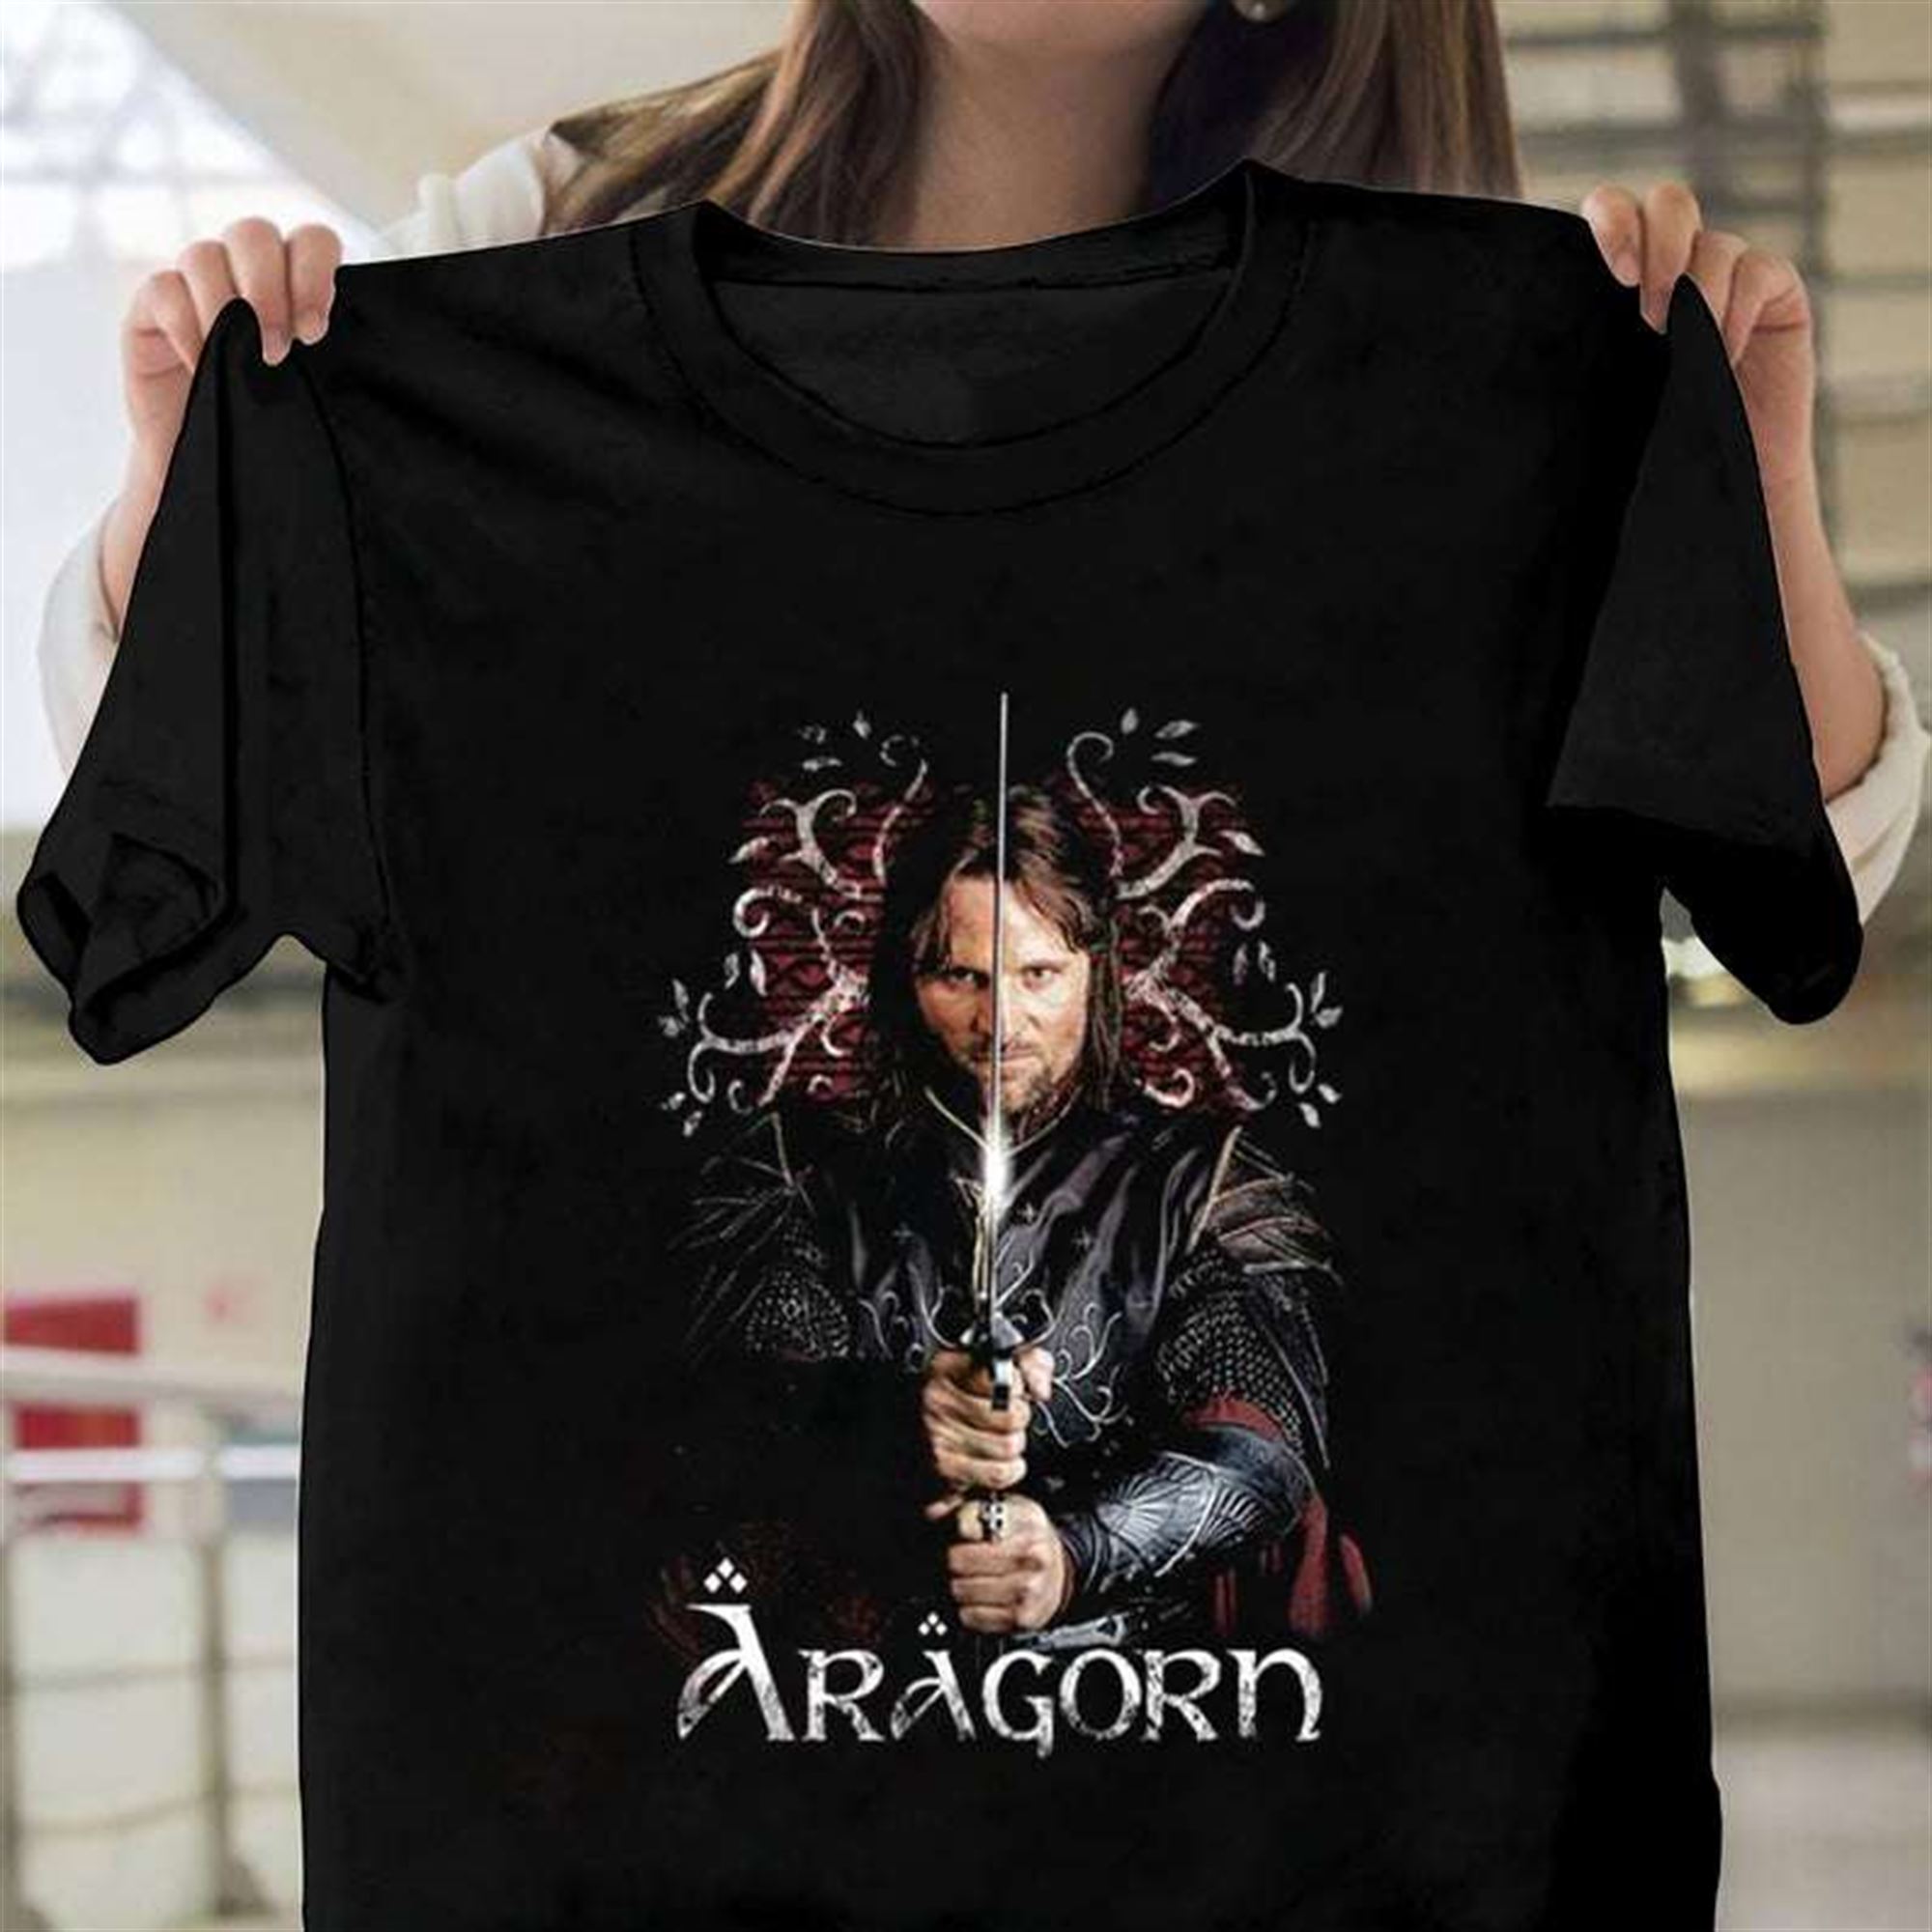 The Lord Of The Rings Aragorn Ranger Of The North T-shirt Size Up To 5xl